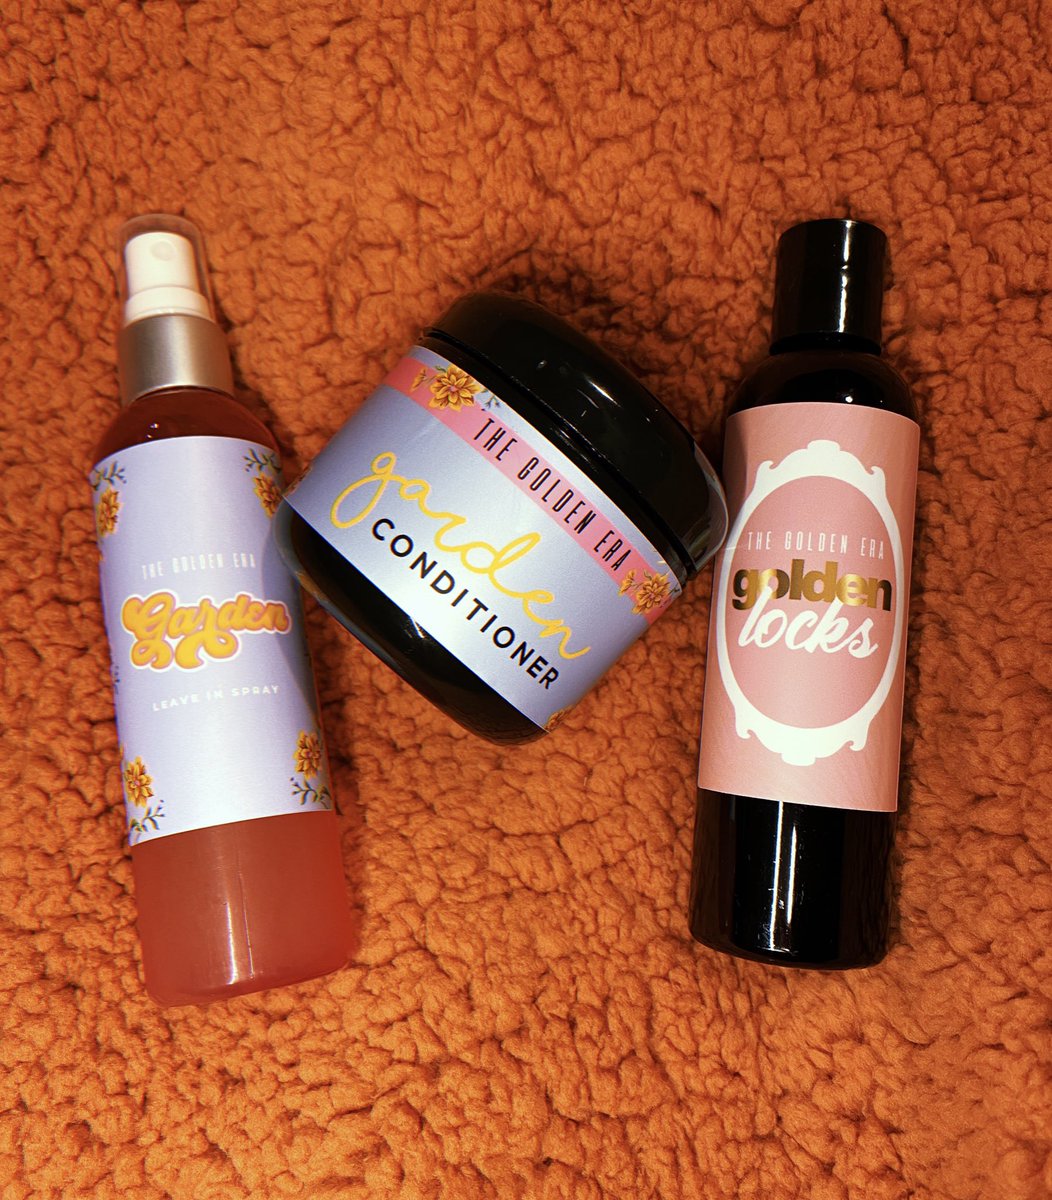 I also have a new bundle out now : my hair is my garden bundle and I think this will be amazing for my curly haired loves during the cold winter months